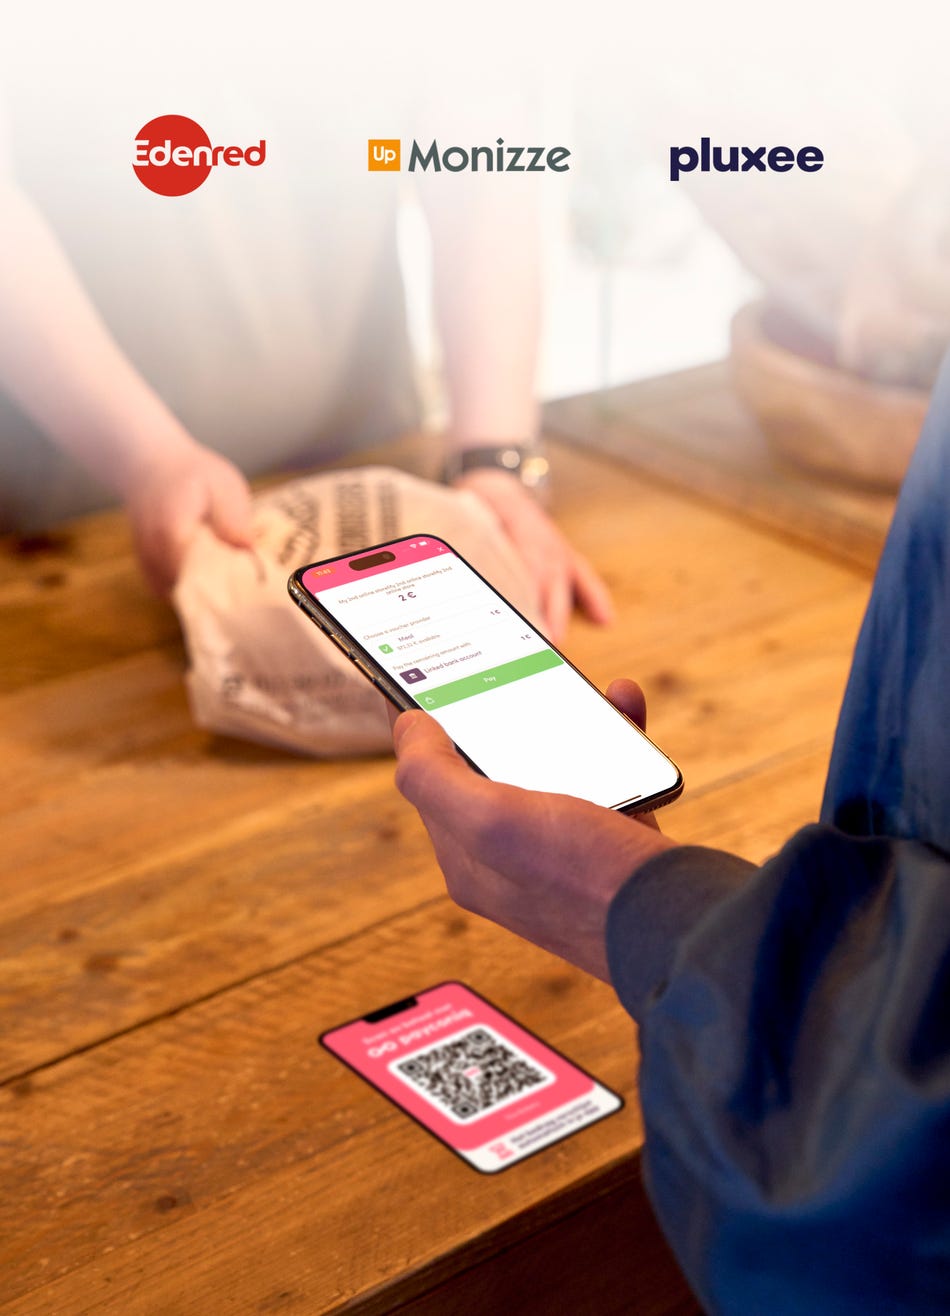 At which merchants can I make mobile payments using my meal vouchers and Payconiq?